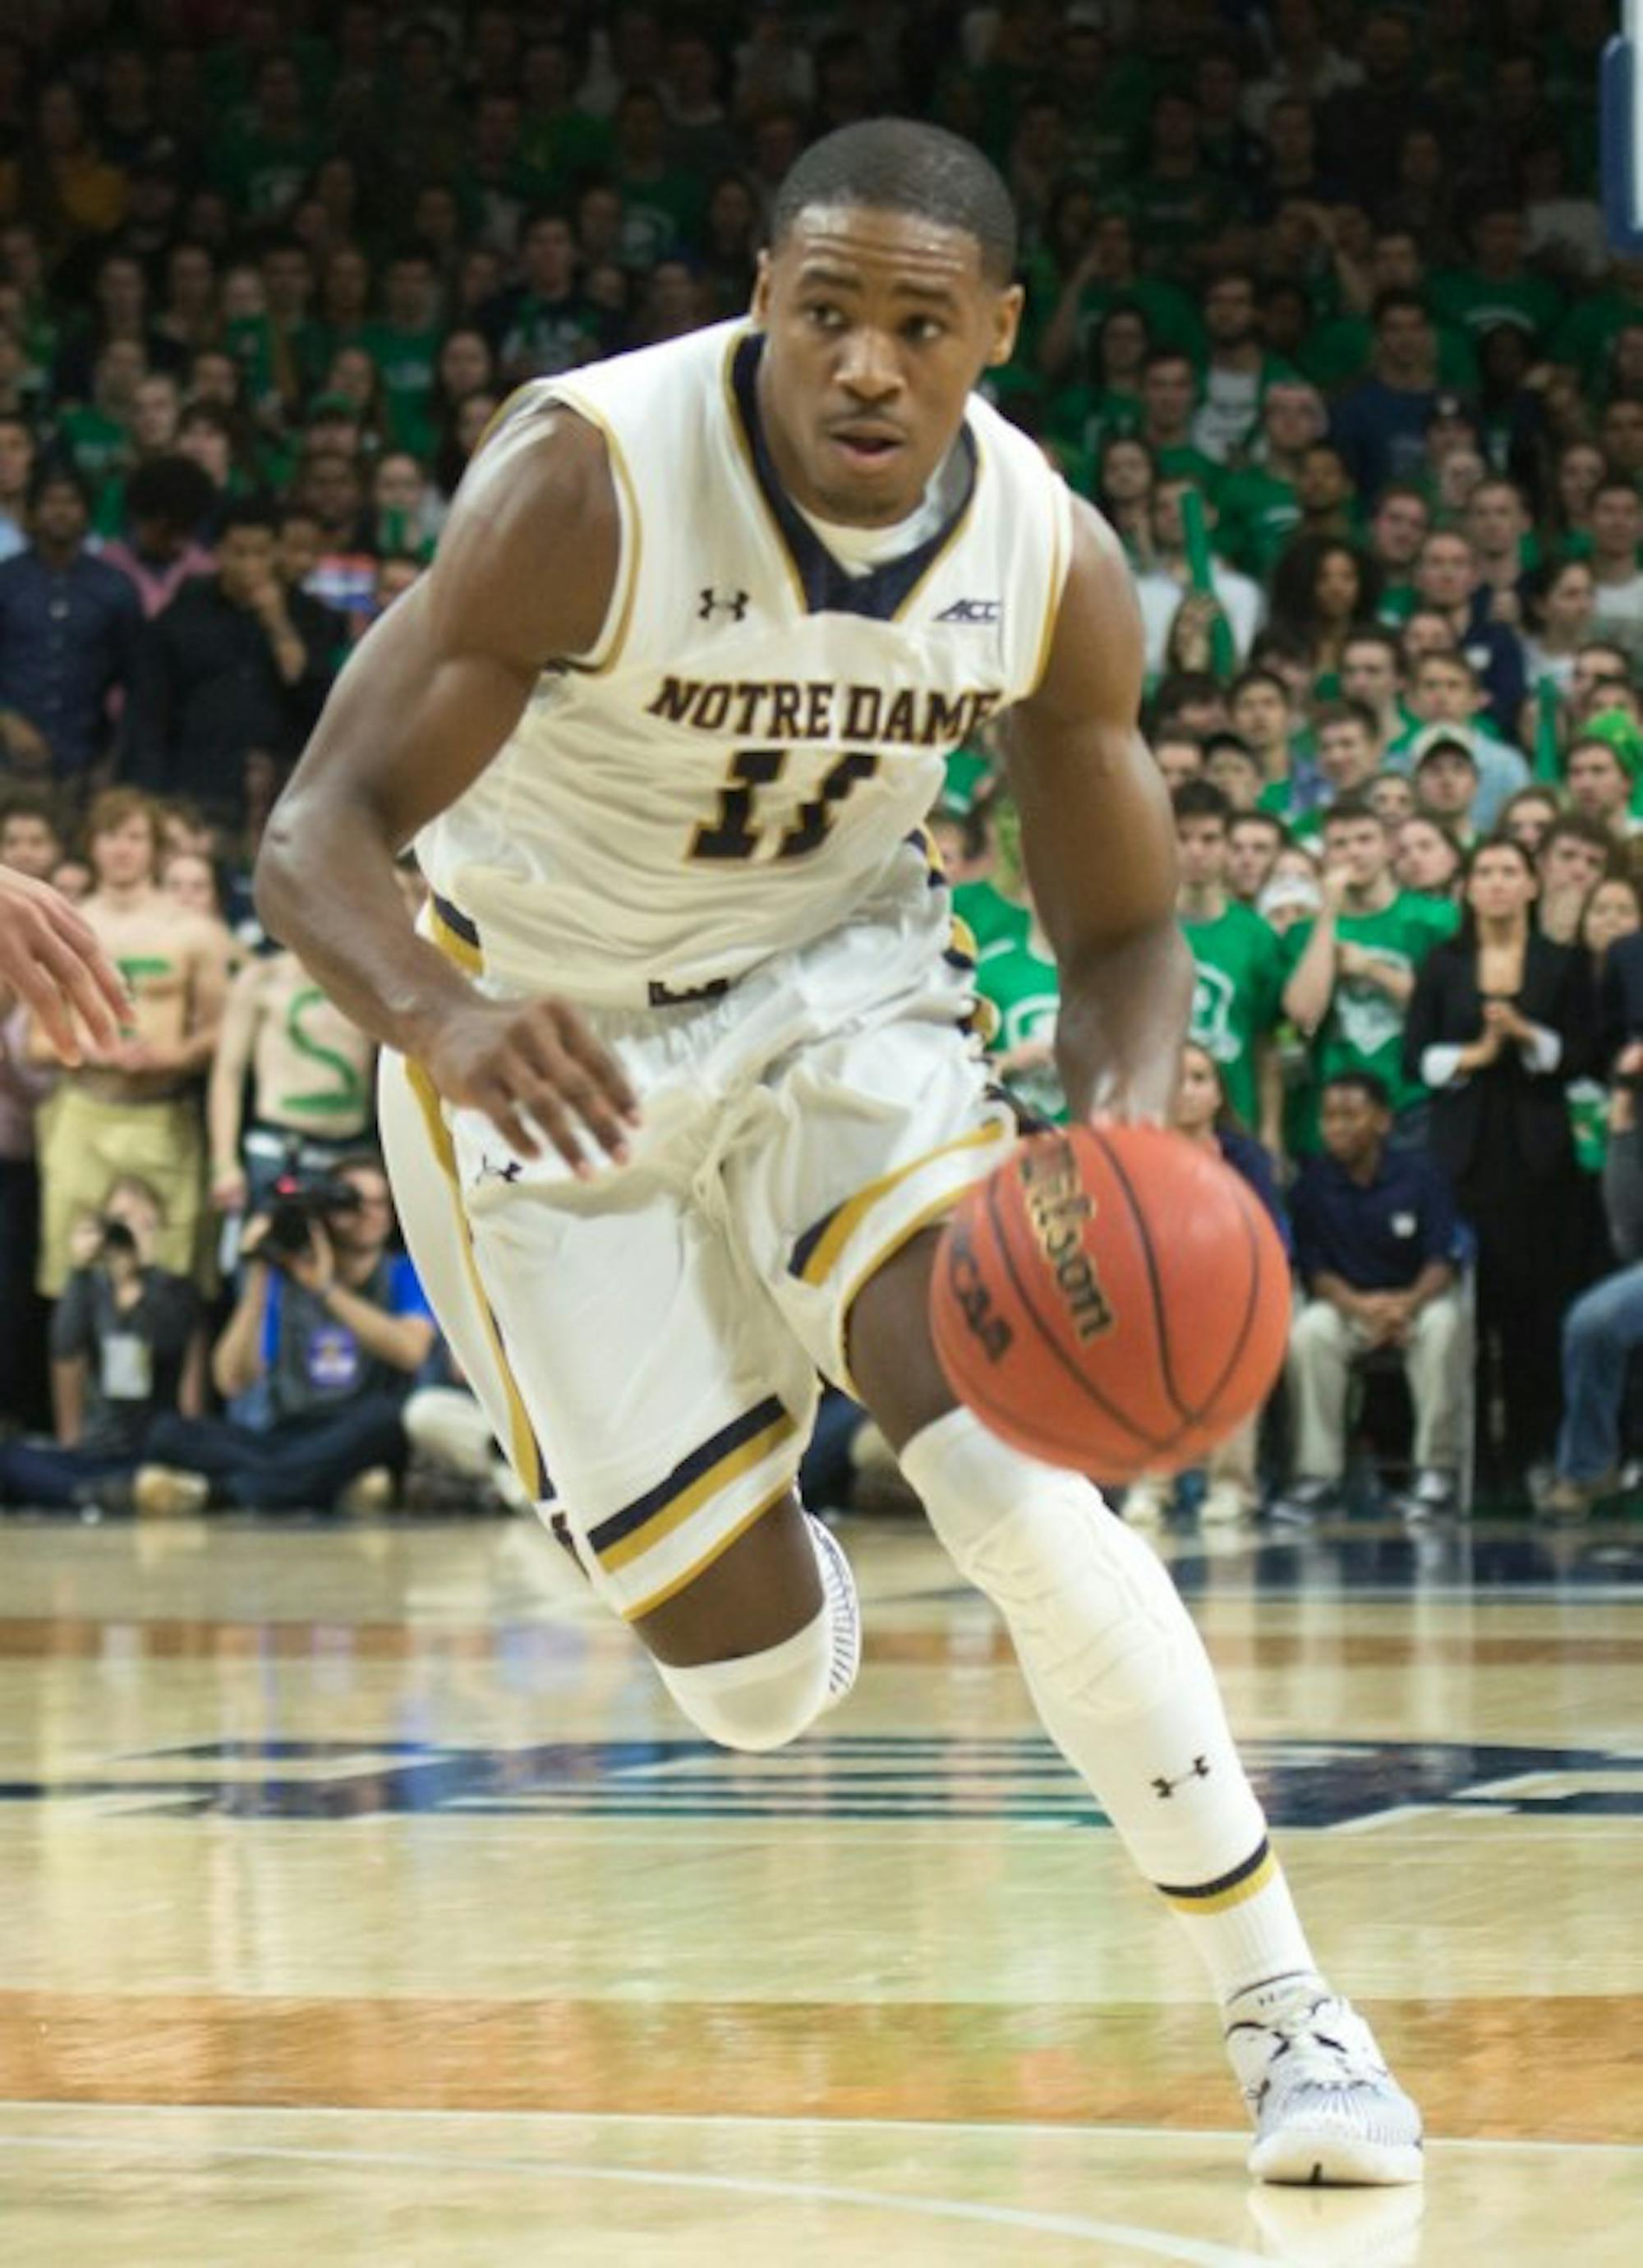 Junior guard and captain Demetrius Jackson drives toward the basket during Notre Dame's 77-73 victory over Duke on Jan. 28 at Purcell Pavilion.